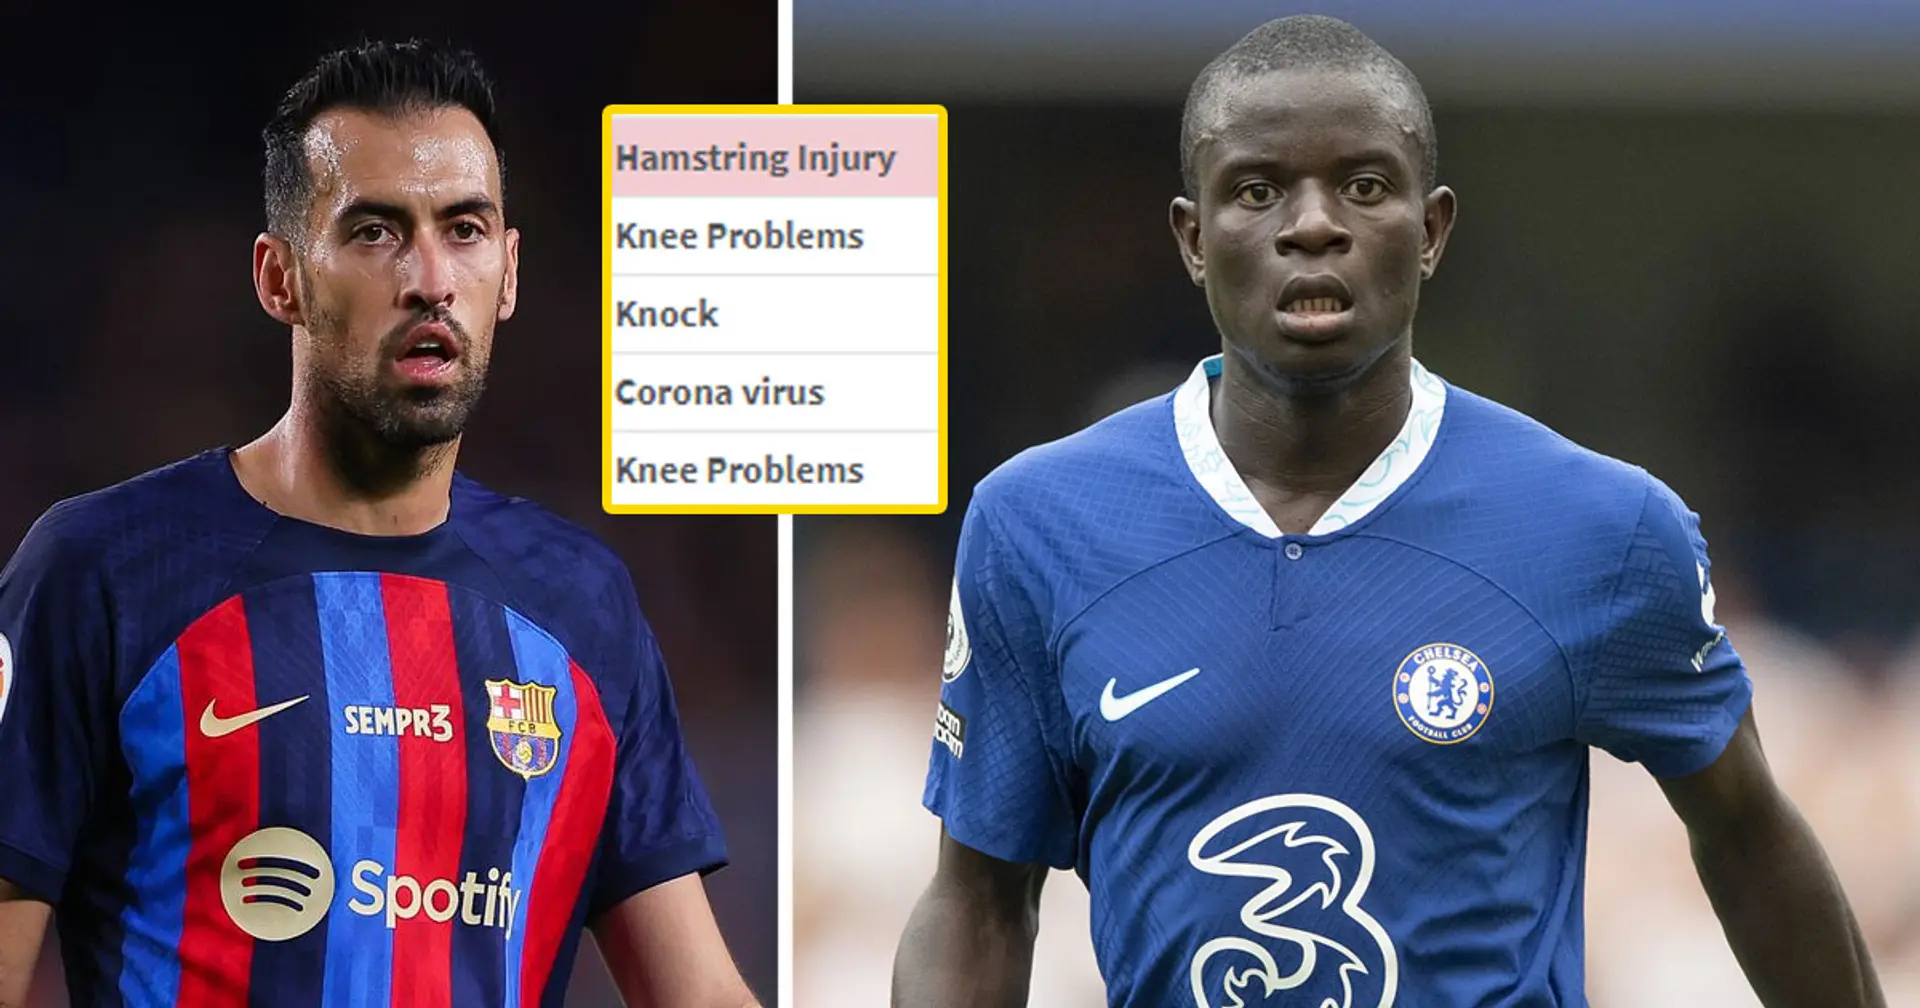 Kante's future at Chelsea in doubt, Barca continue following midfielder (reliability: 4 stars)